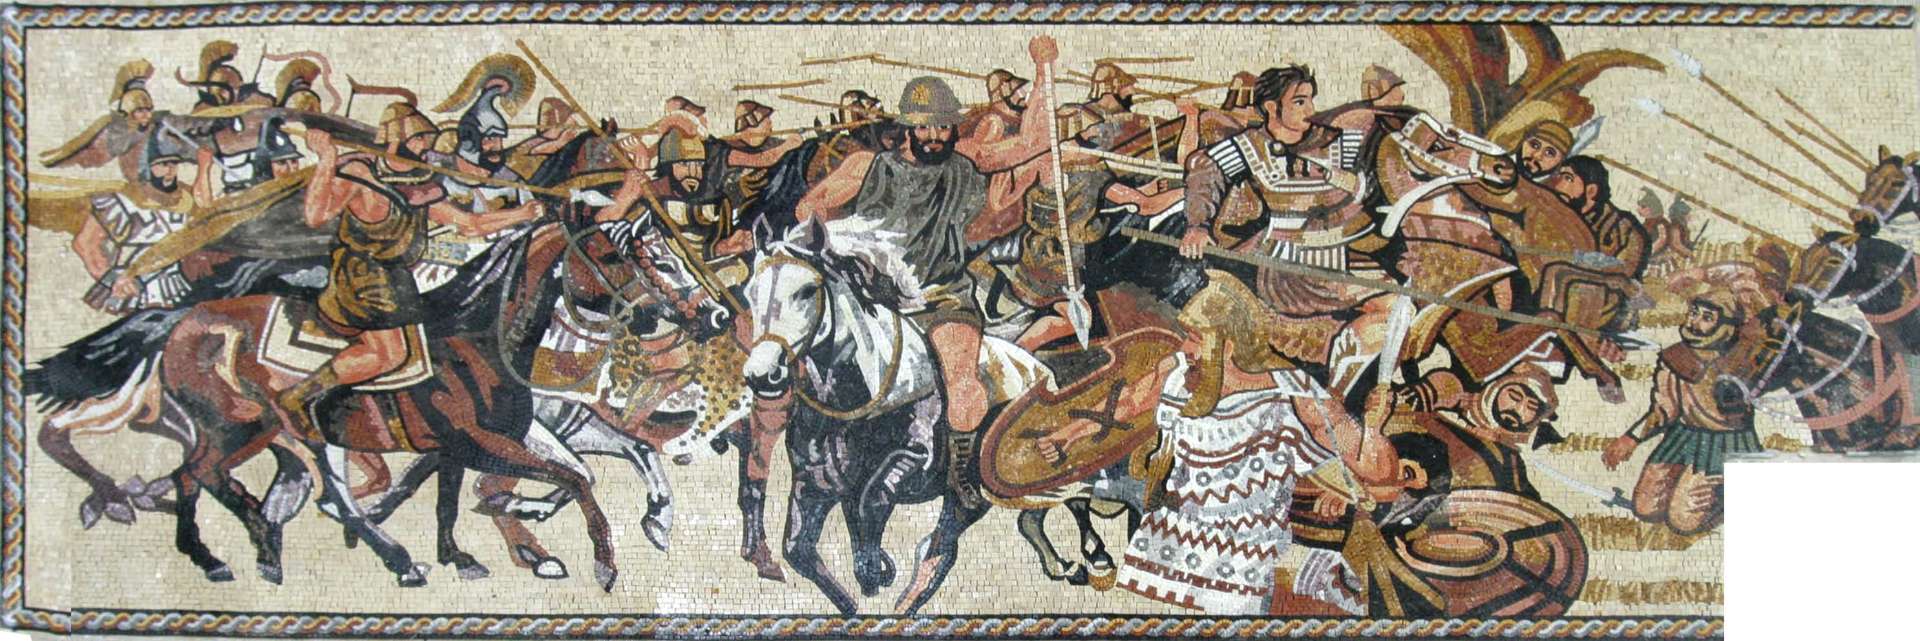 The Alexander Battle of Issus Roman Mosaic | Mosaic Marble